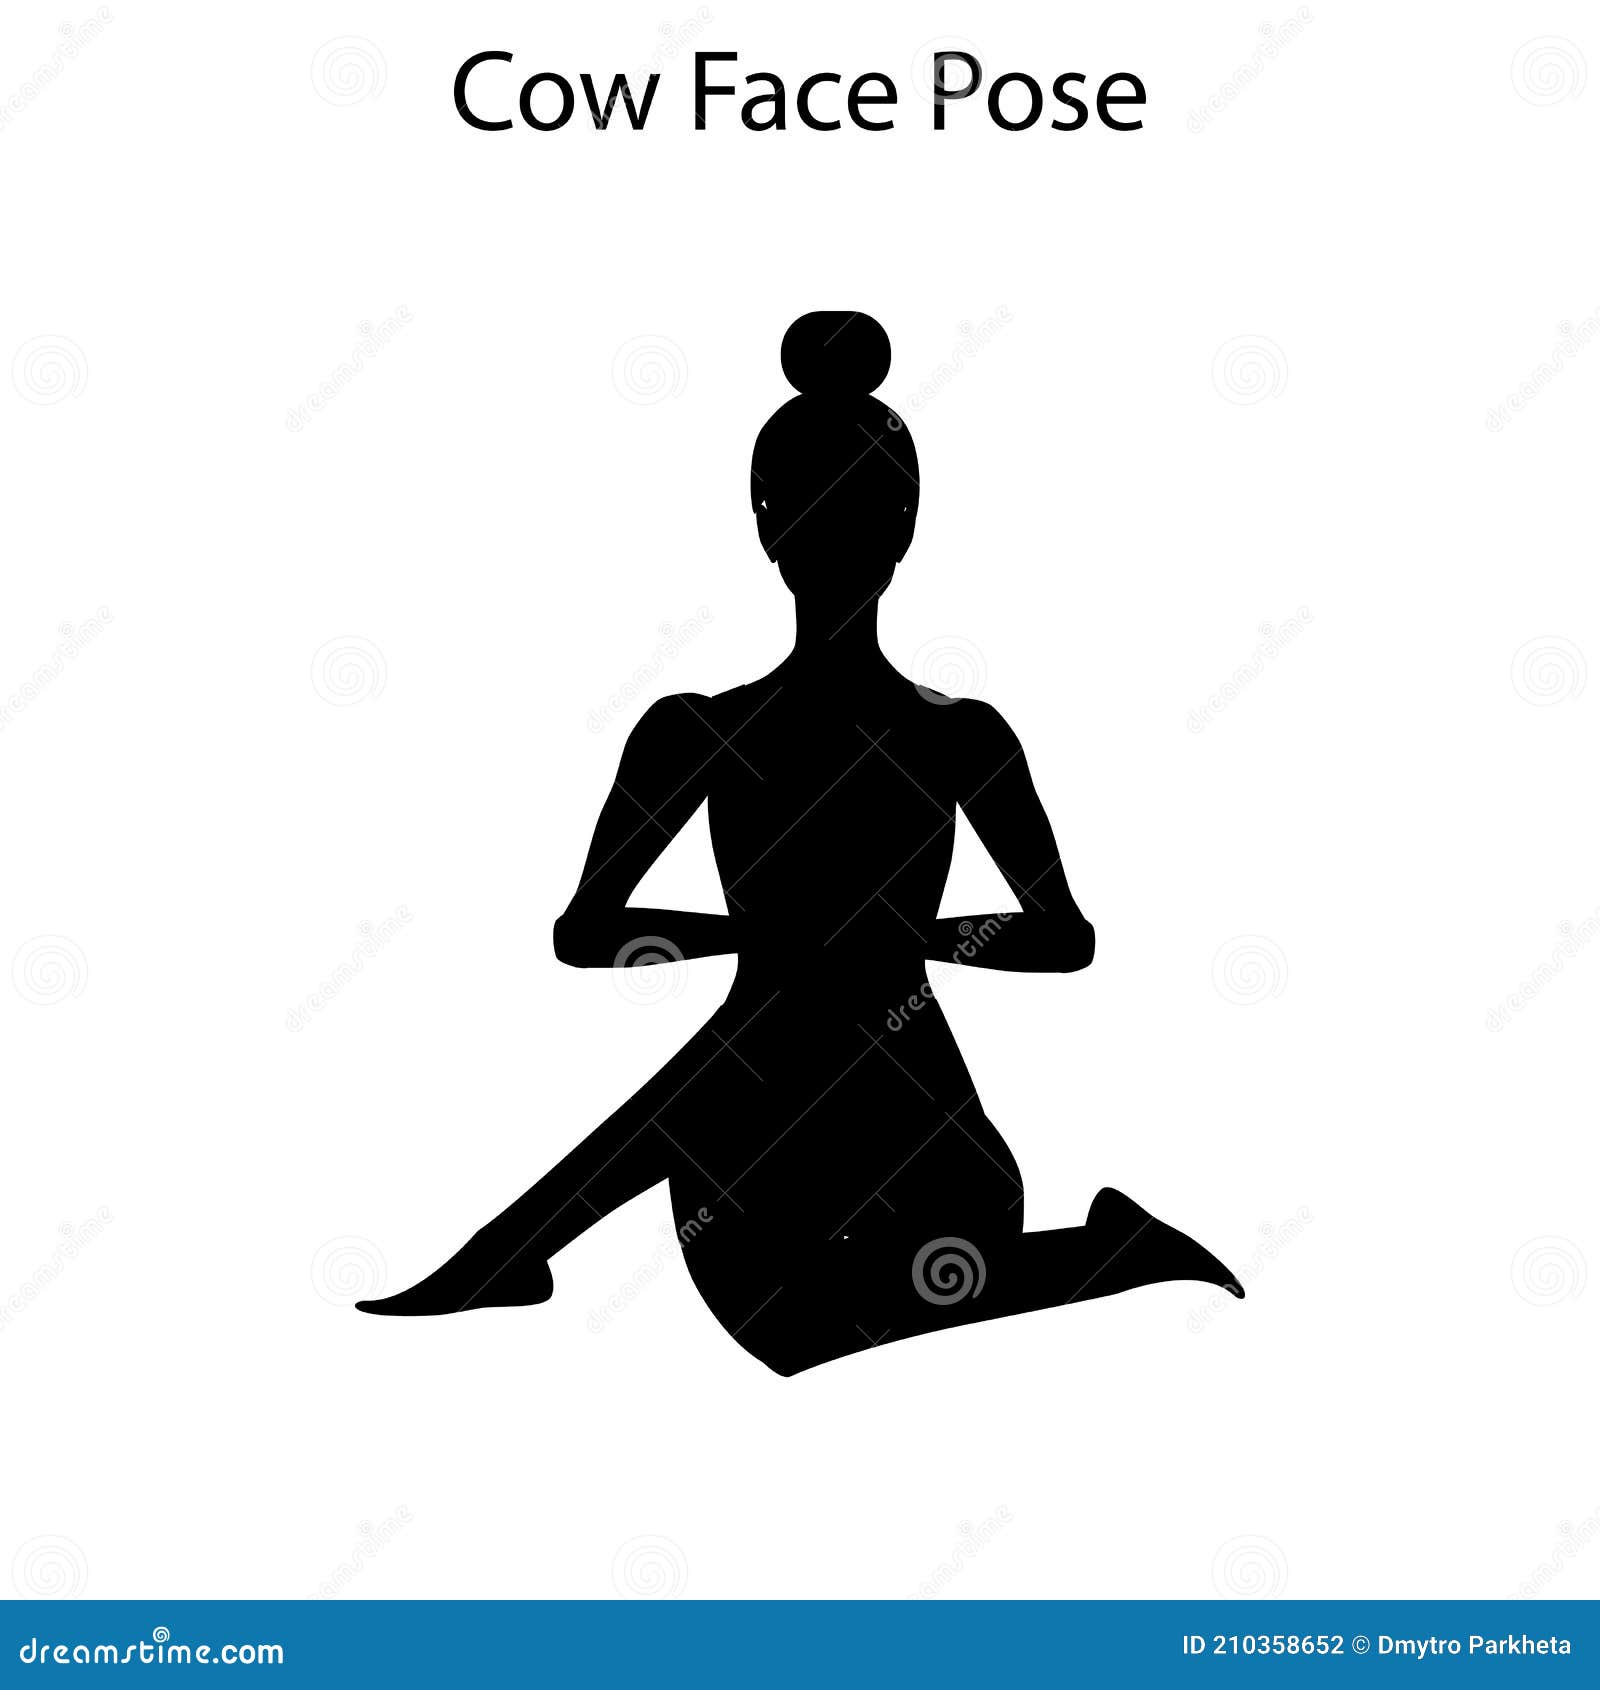 Yoga Fundamentals on Instagram: “Cow Face Pose is a seated yoga posture  that deeply stretches the hips and shoulders. It calms the mind and brings  balance to th…